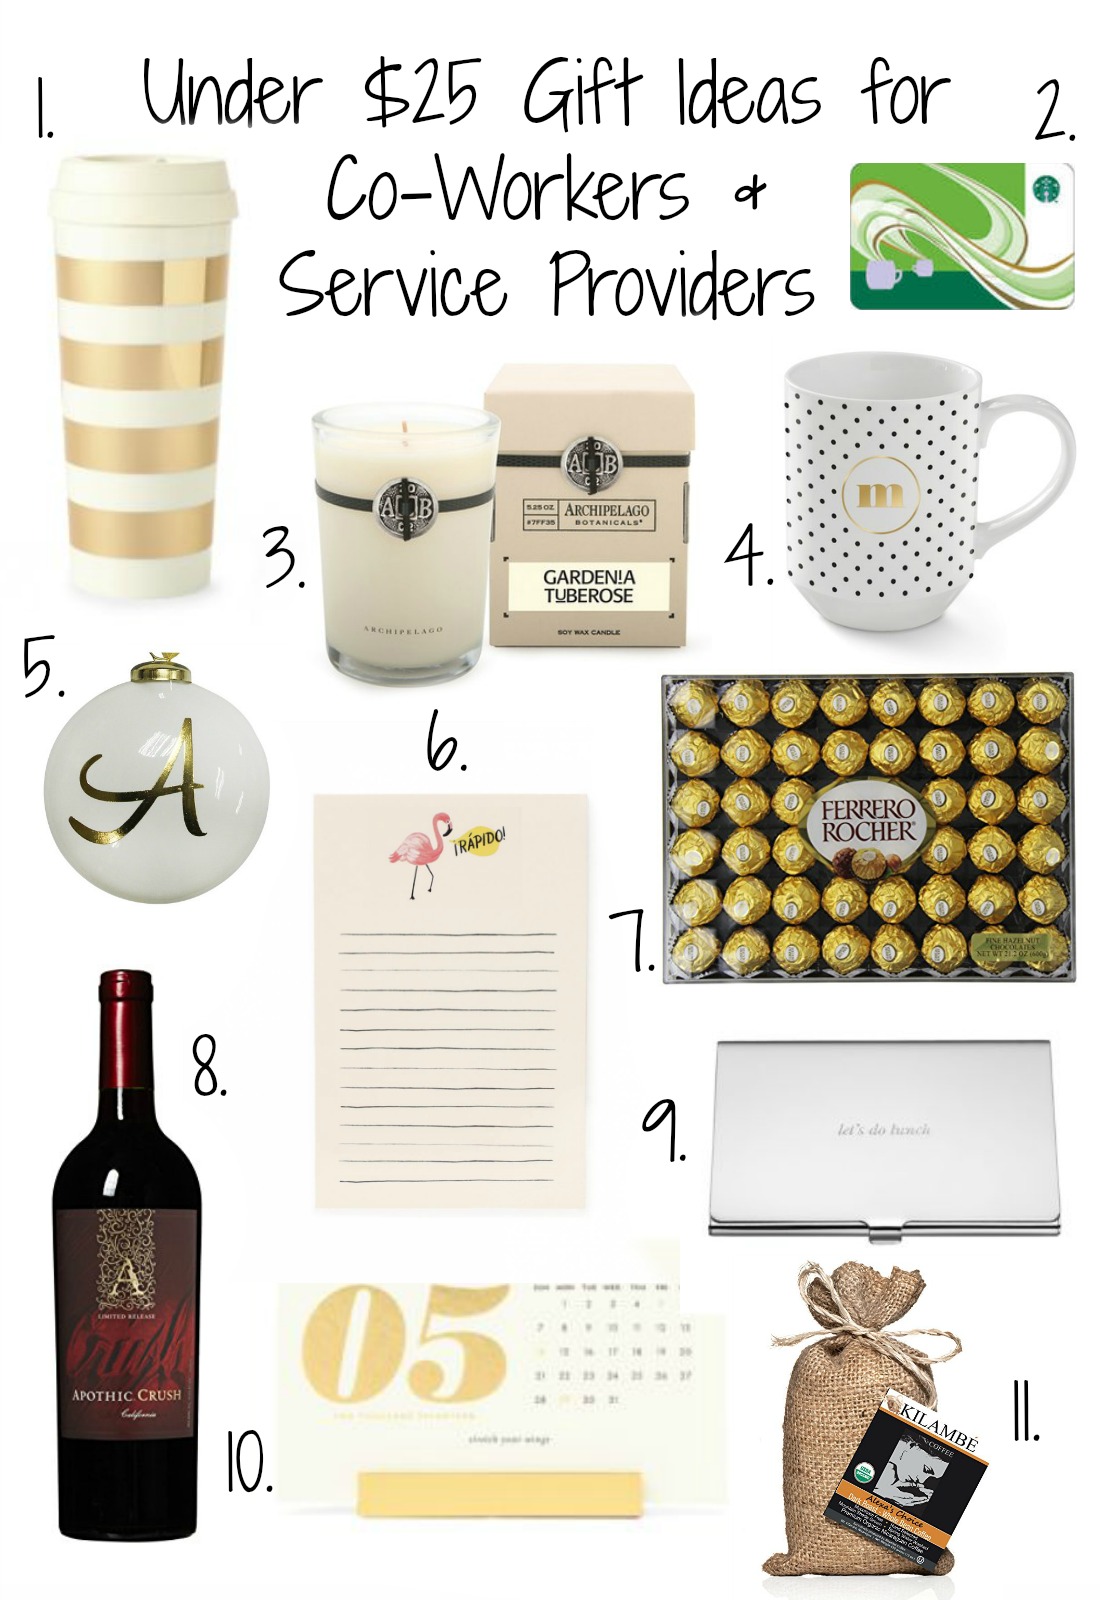 https://coffeebeansandbobbypins.com/wp-content/uploads/2016/12/Gift-Guide-for-Coworkers-and-Service-Providers.jpg